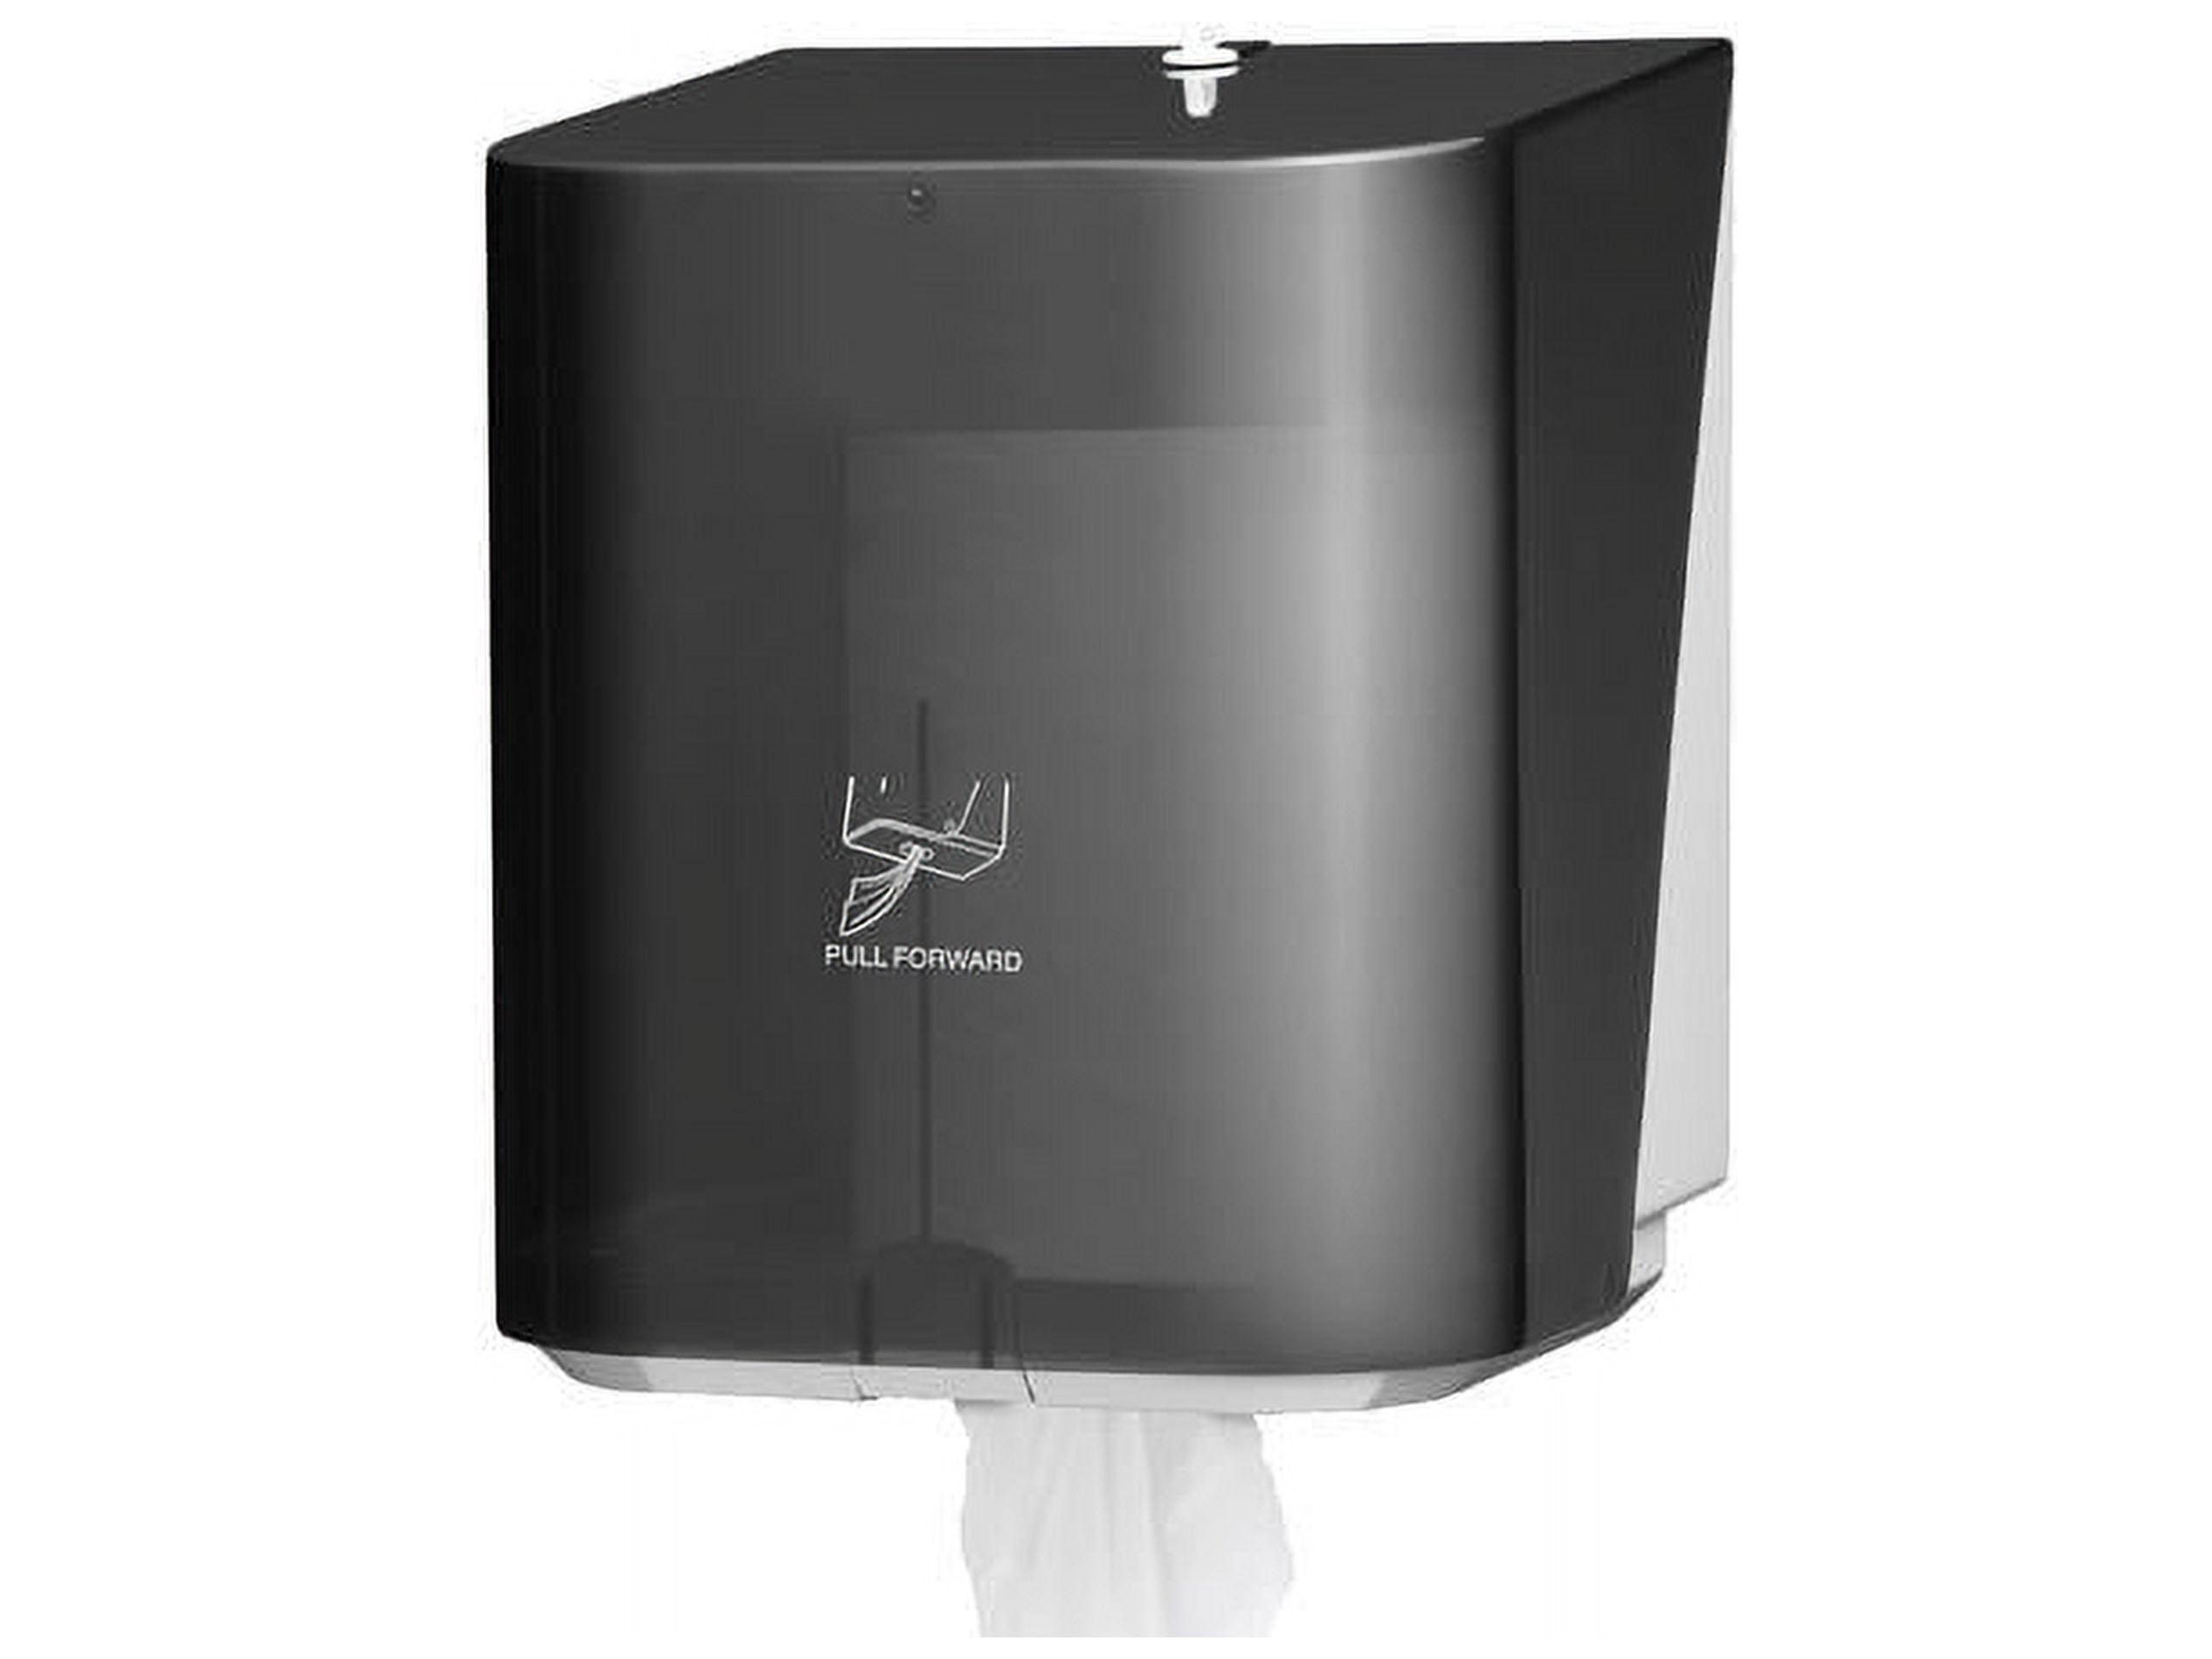 Picture of Kimberly-Clark 09335 In-Sight Center-Pull Towel Dispenser